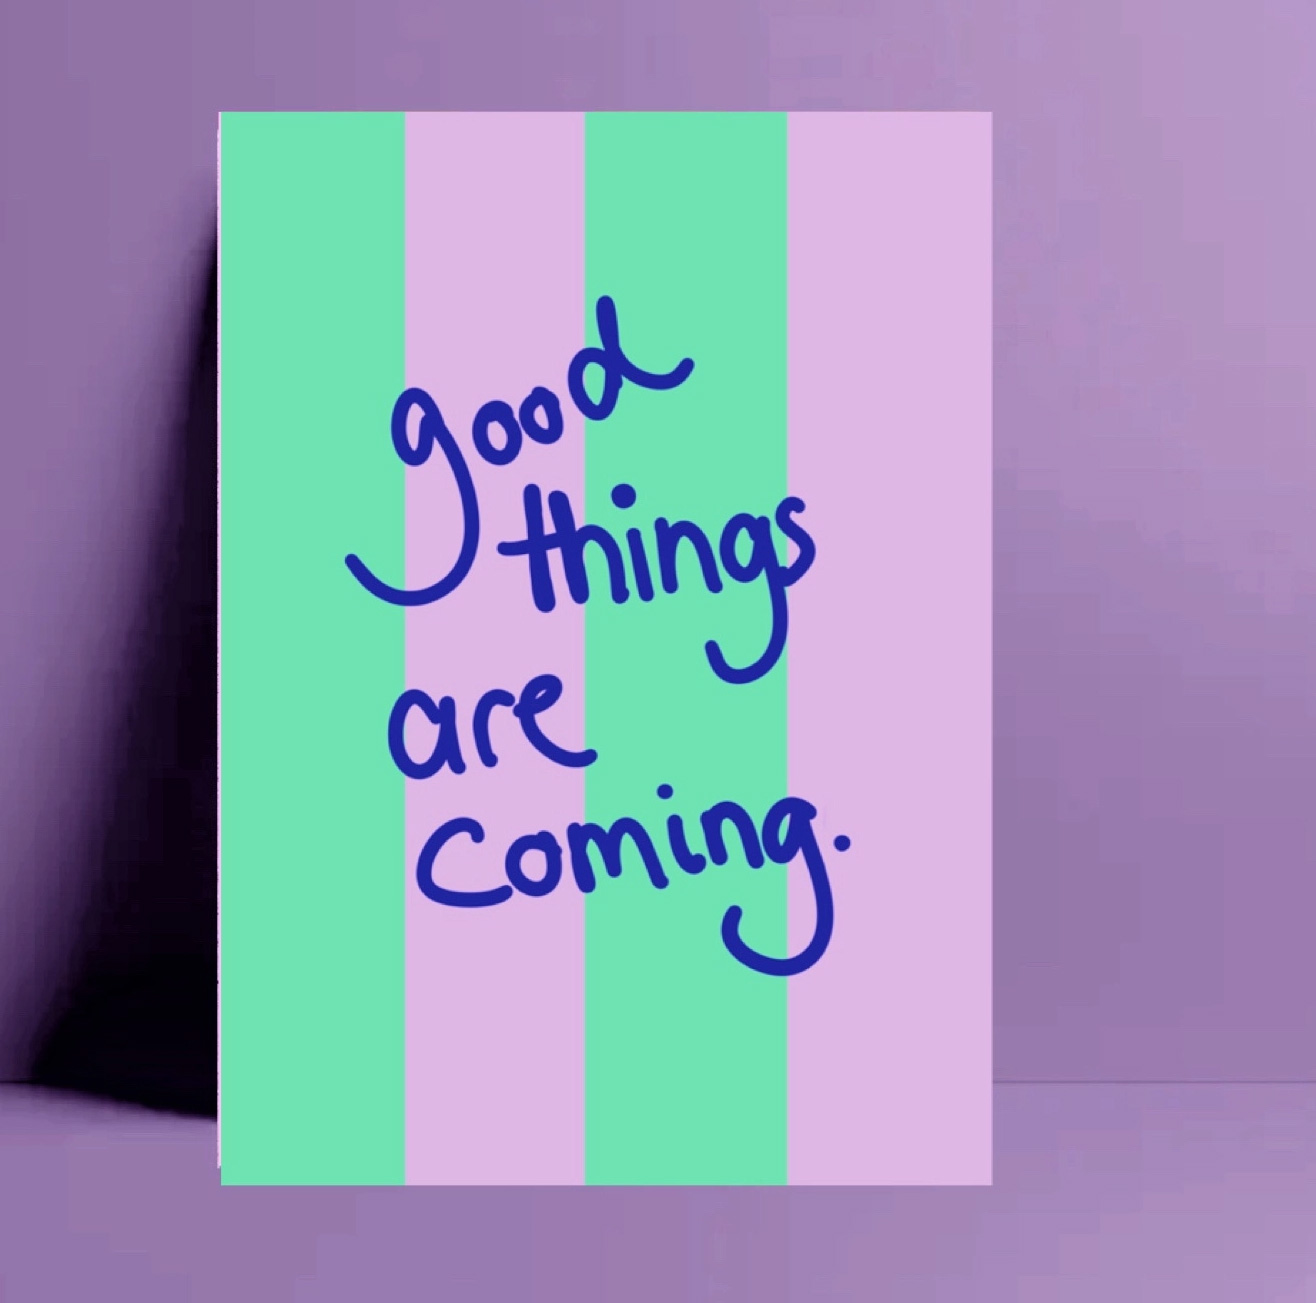 Postkarte "Good things are coming"  von Ute Arnold 